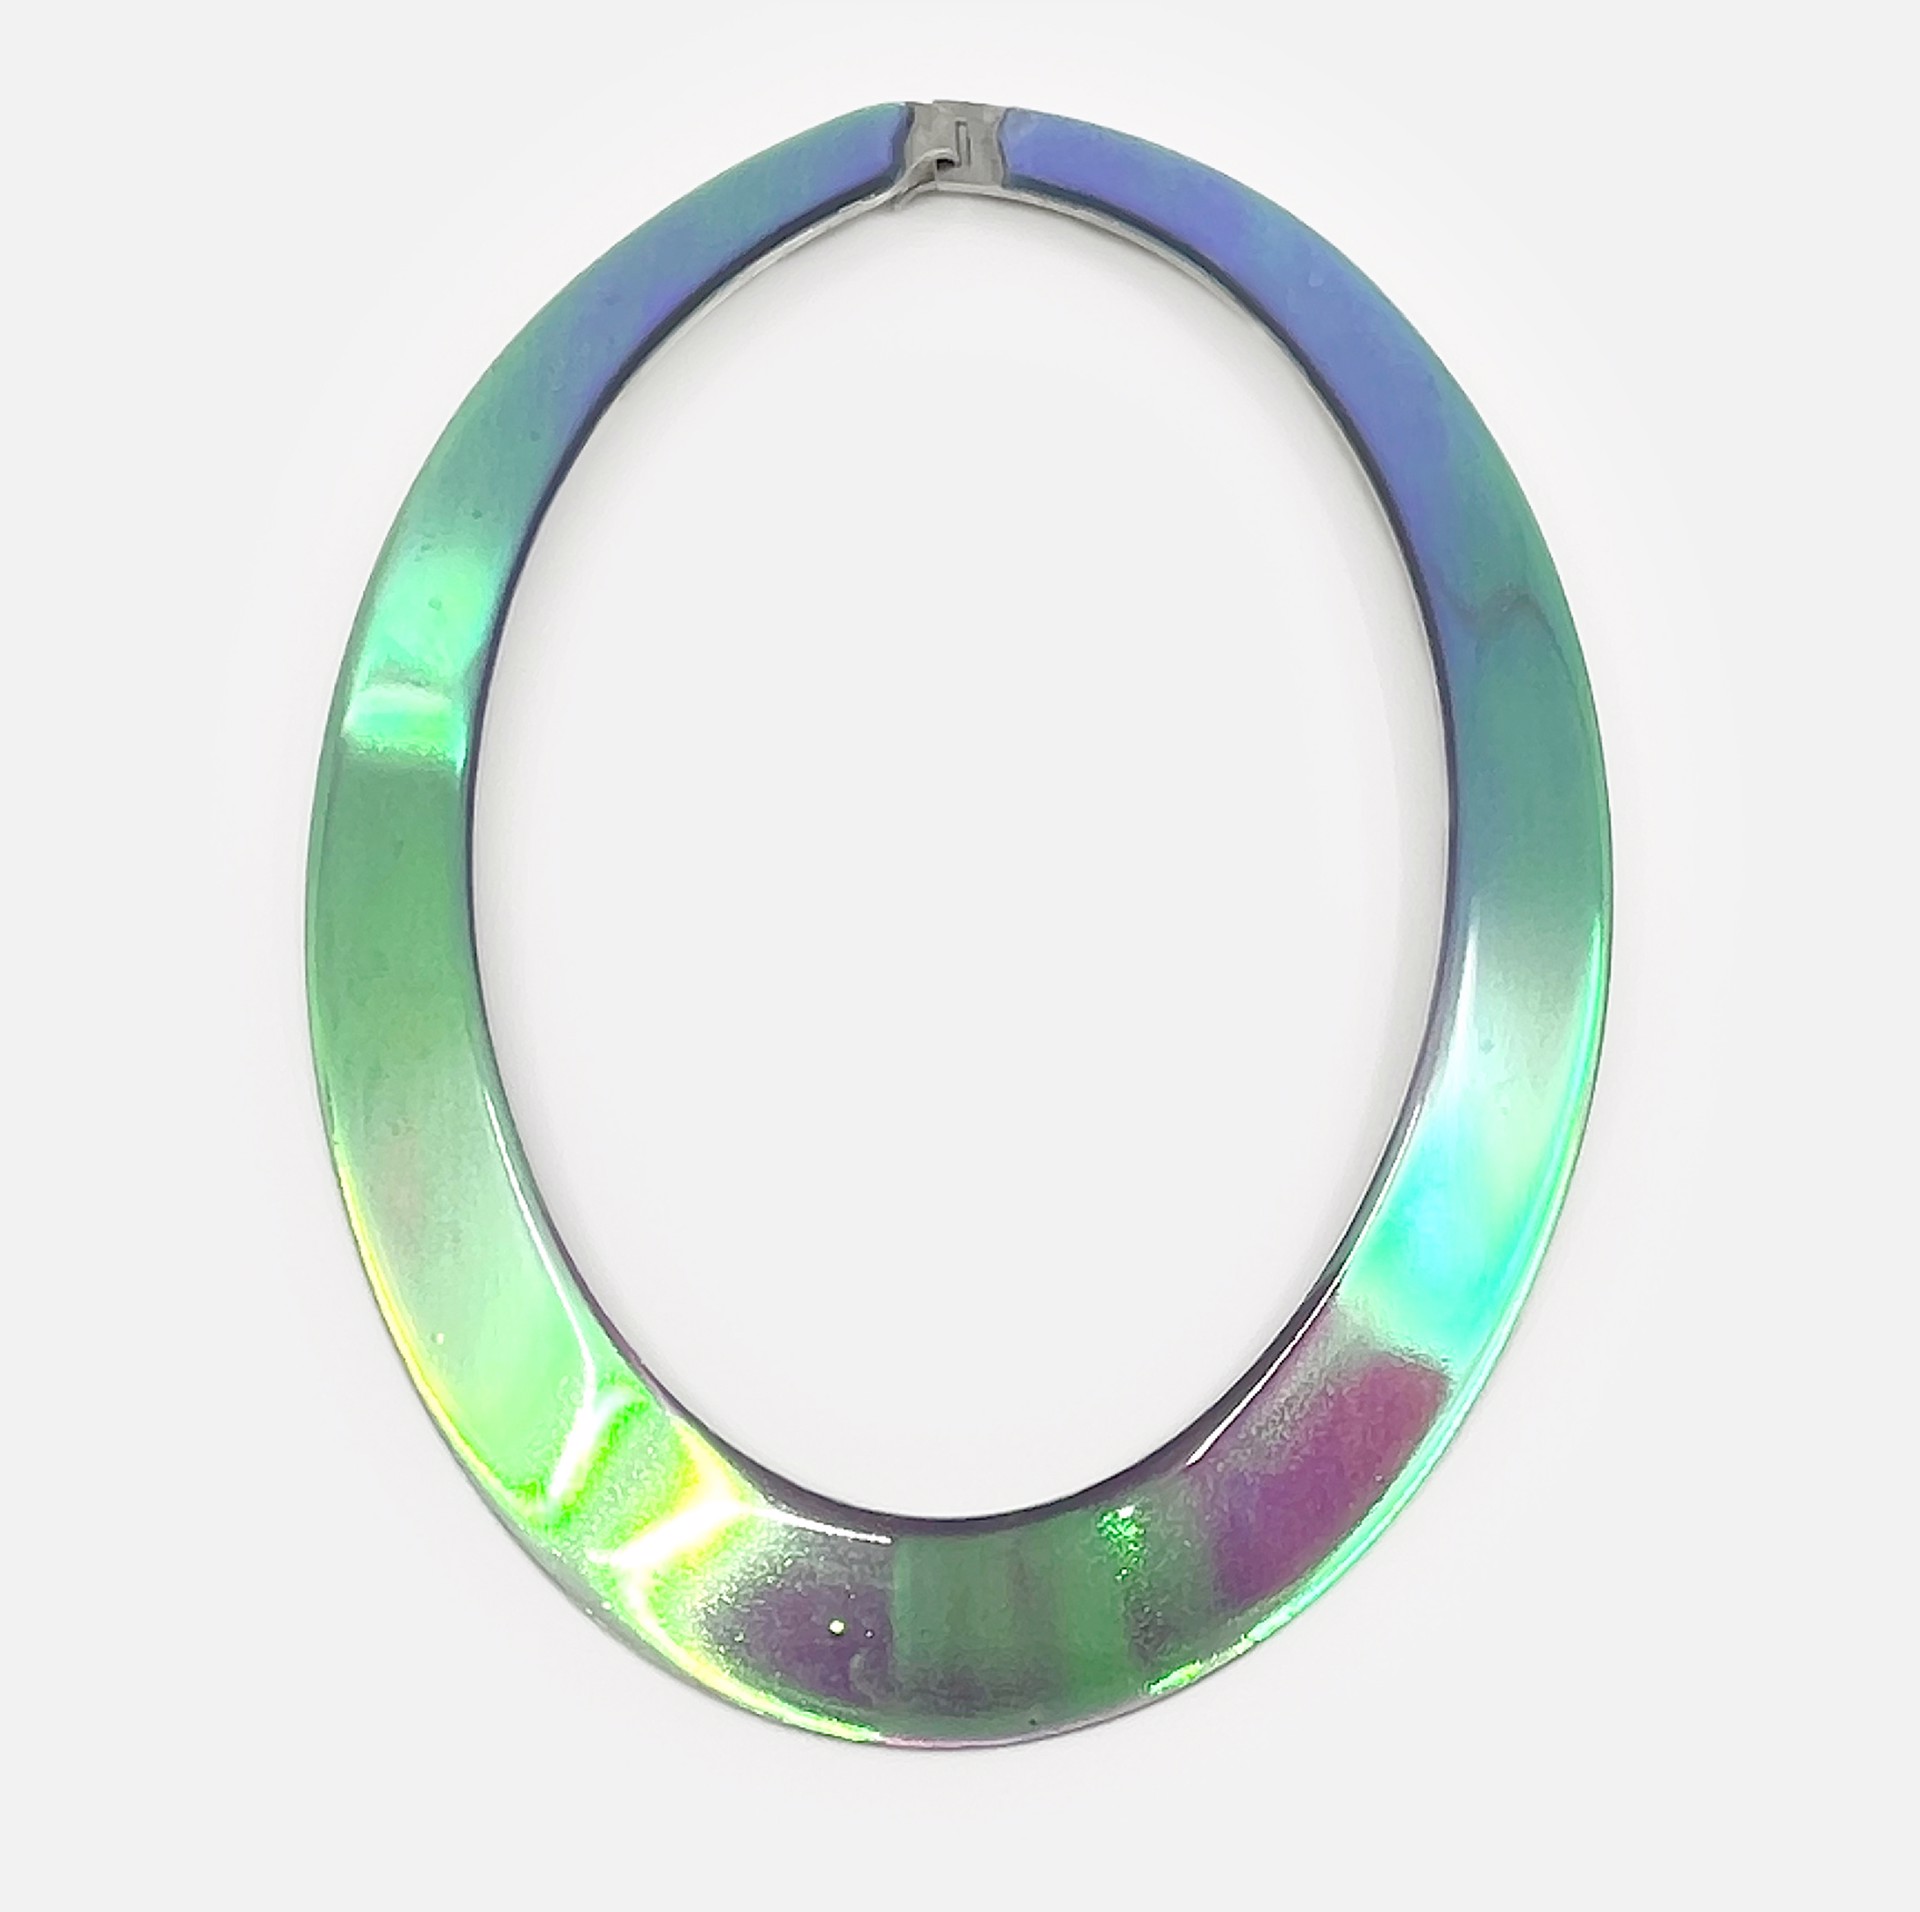 Halo Necklace (Edition of 7) by Leslie Shershow